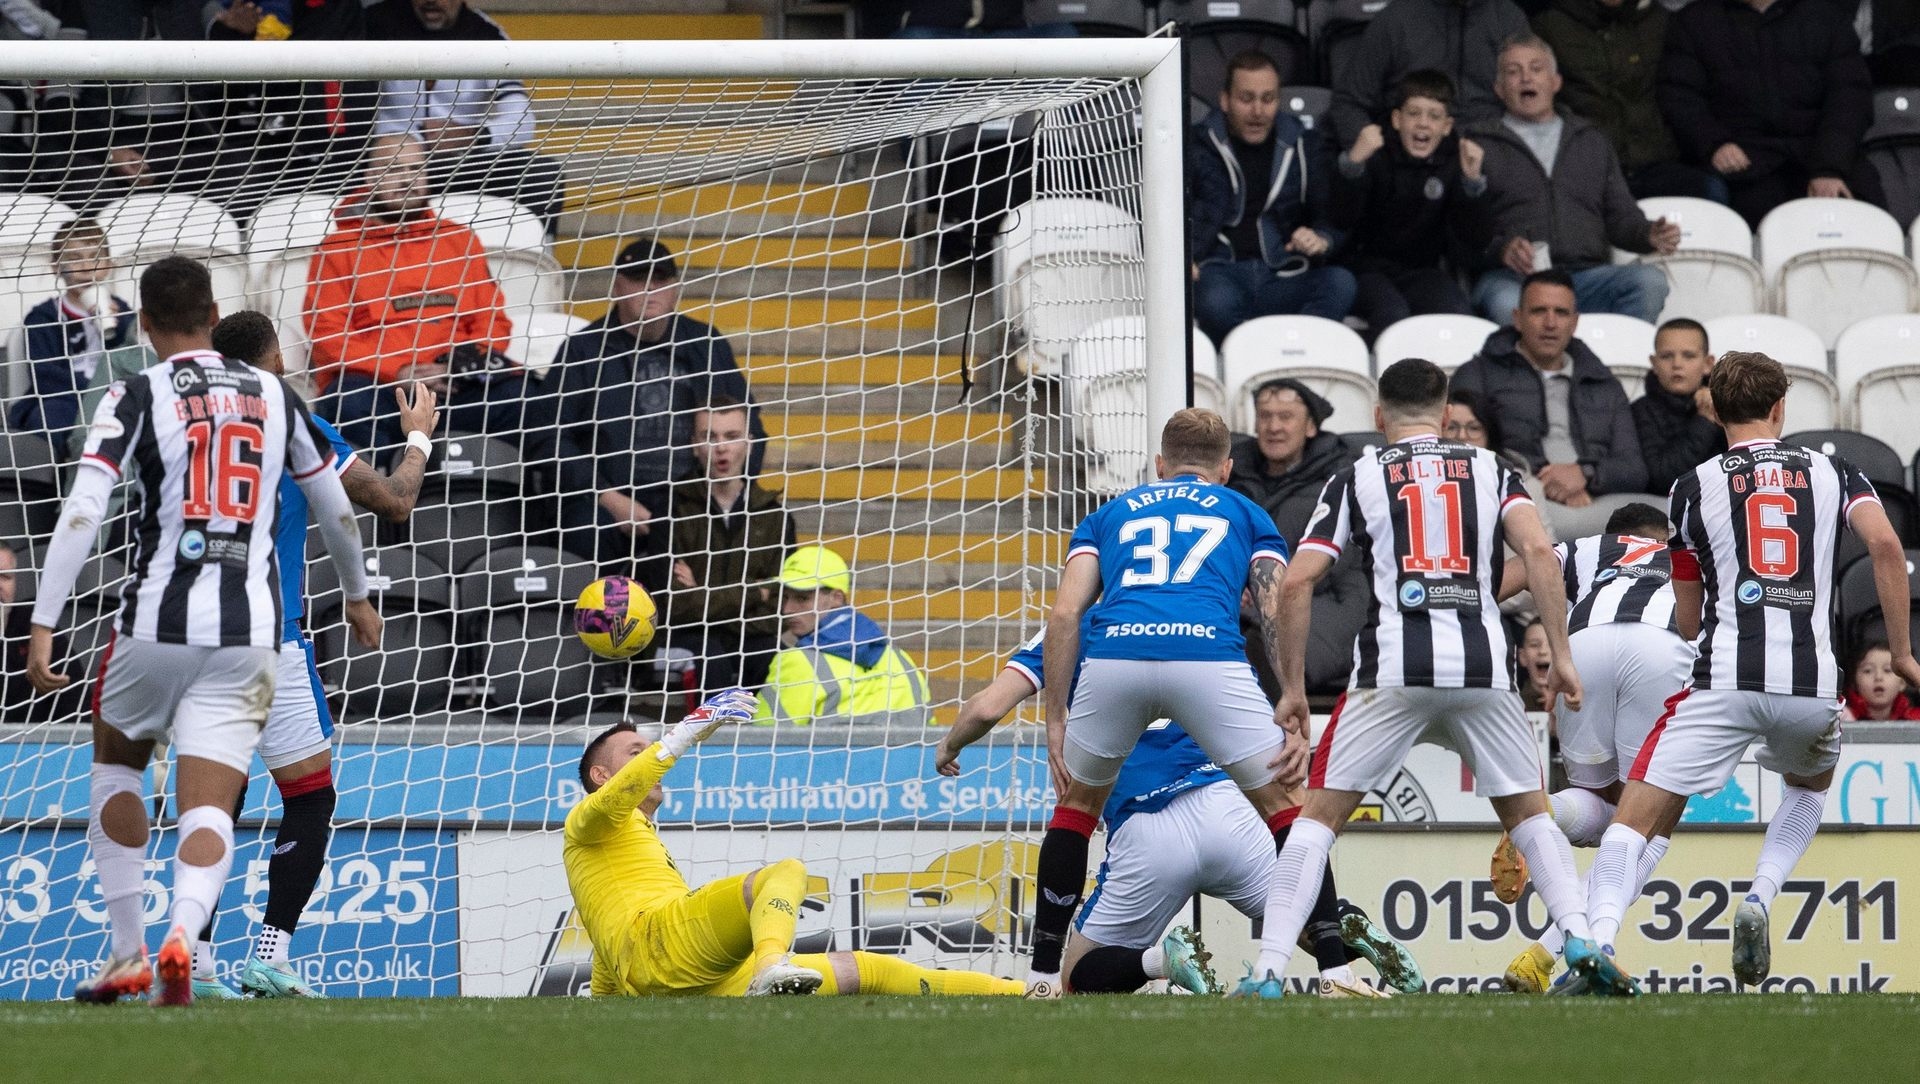 Jonah Ayunga scored to put St Mirren ahead against Rangers. (Photo by SNS Group)